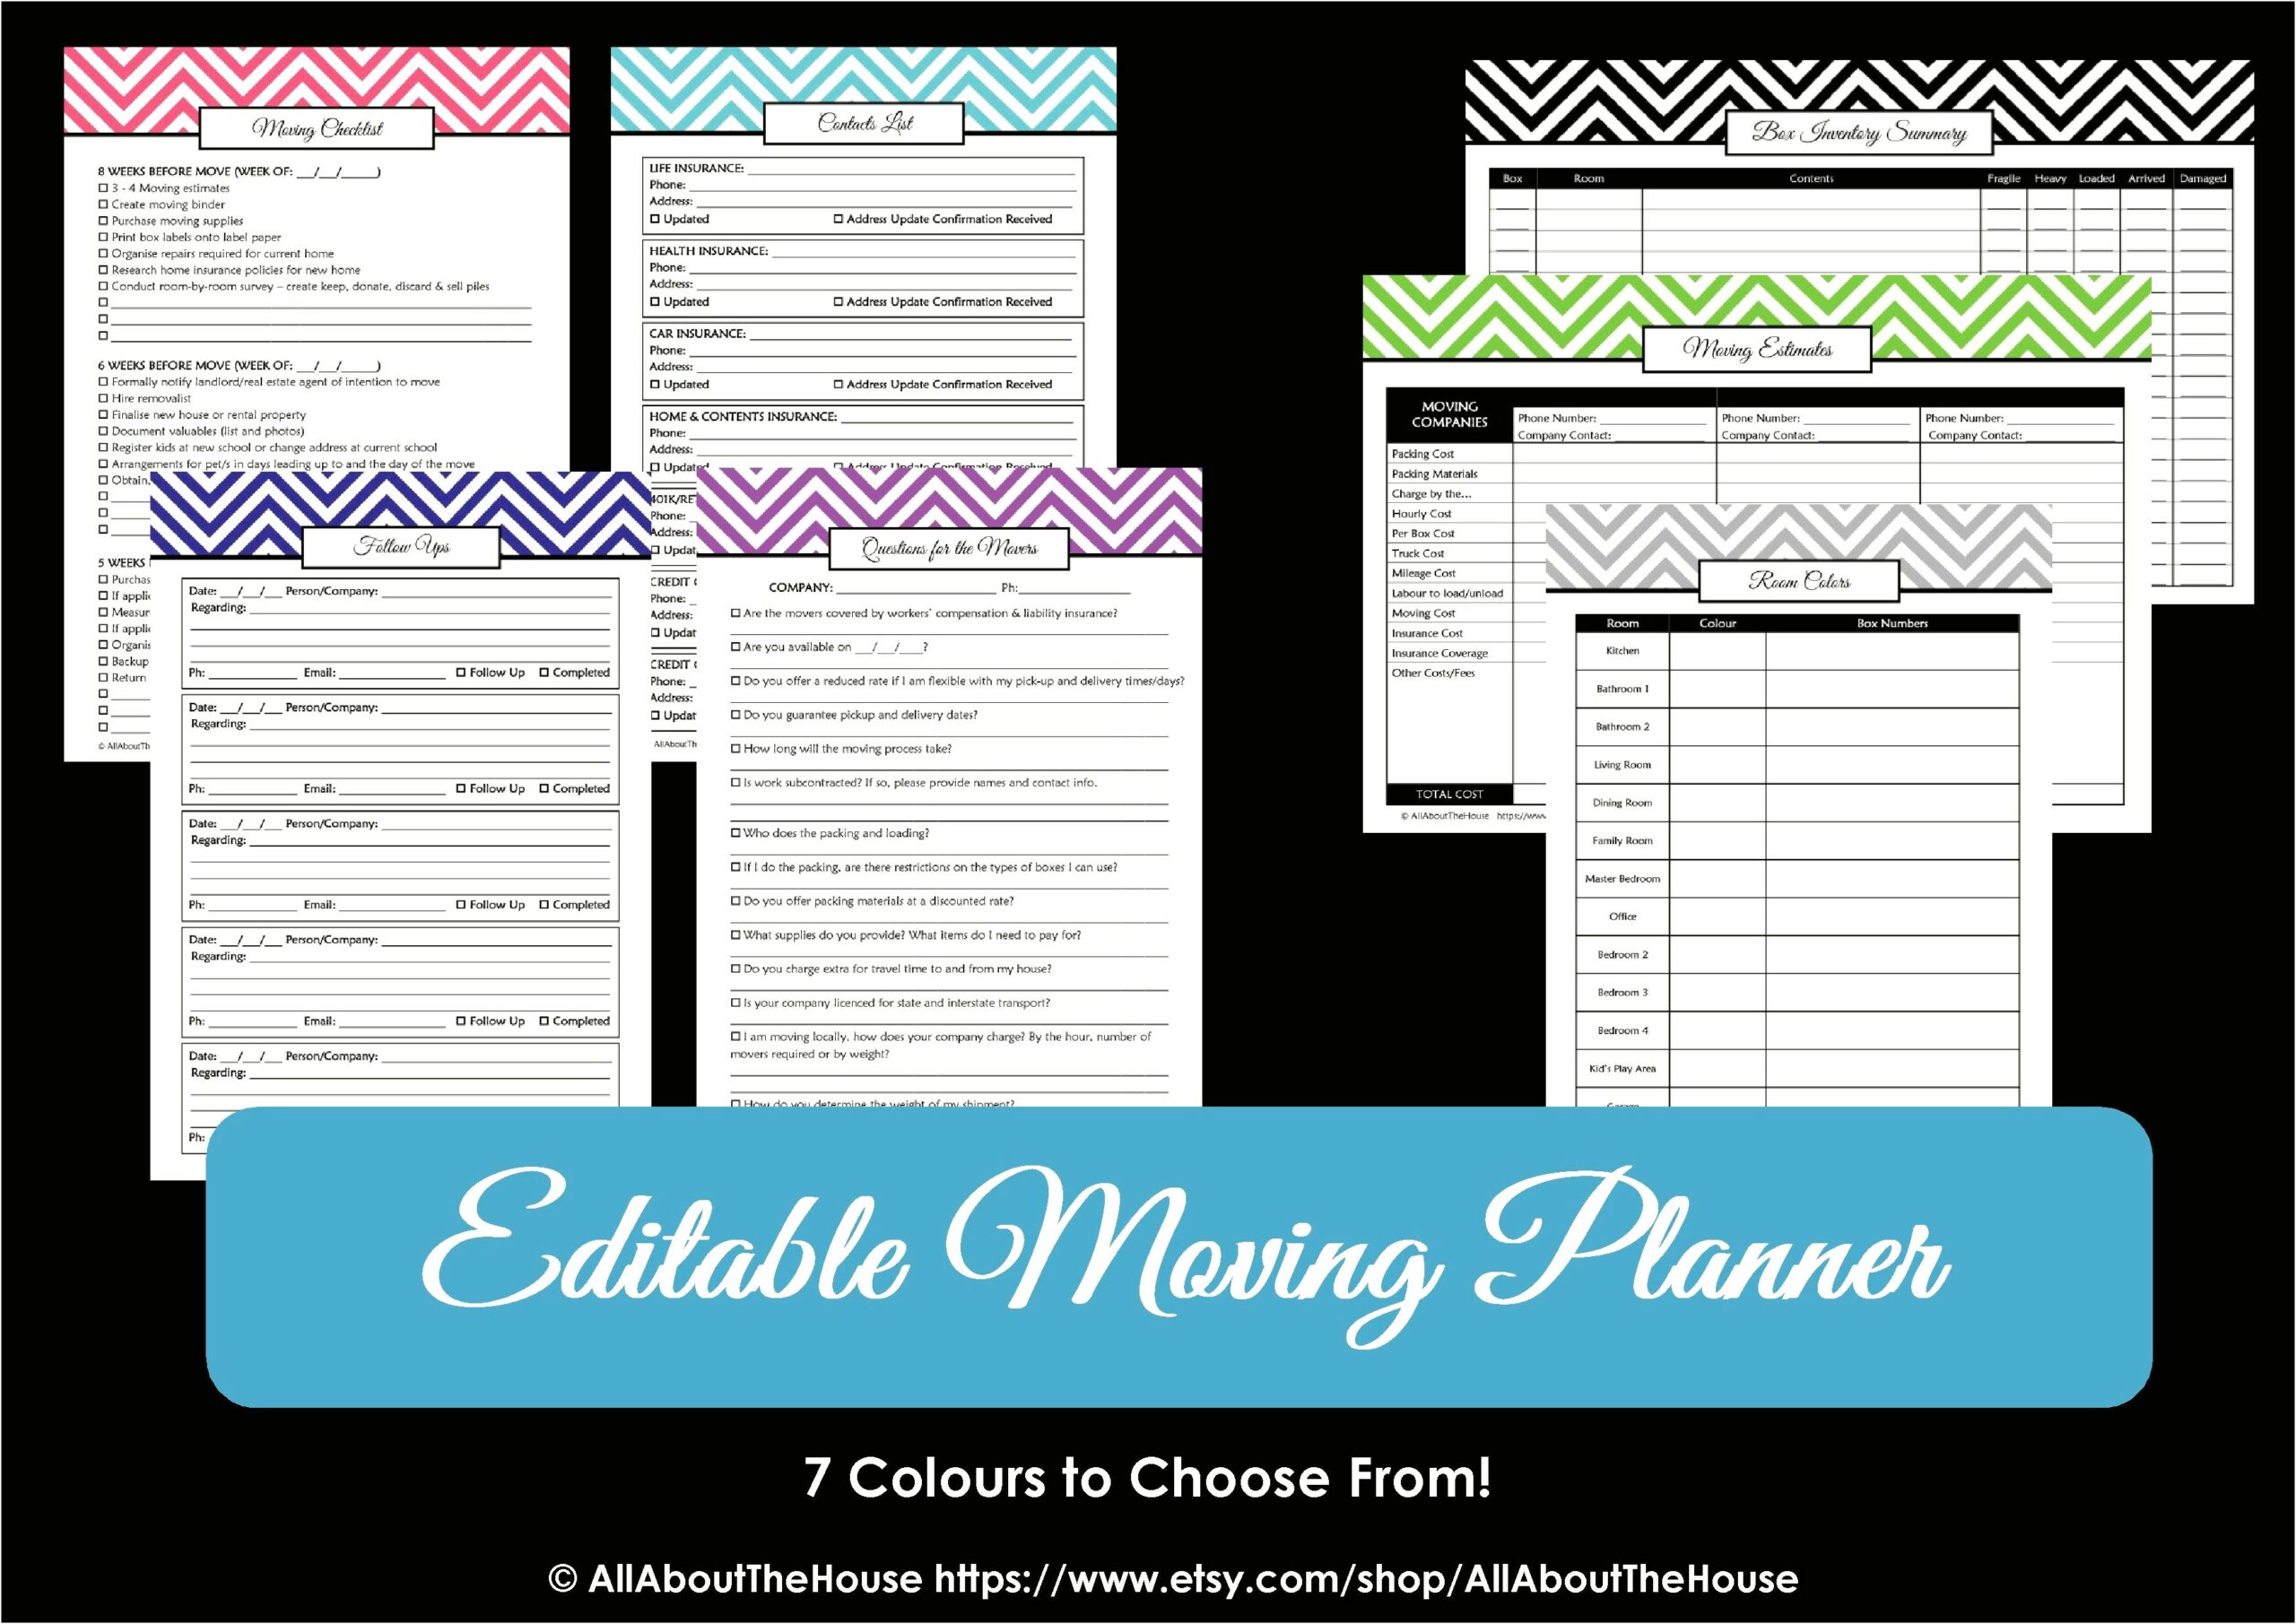 Free Printable Label Templates For Moving Box